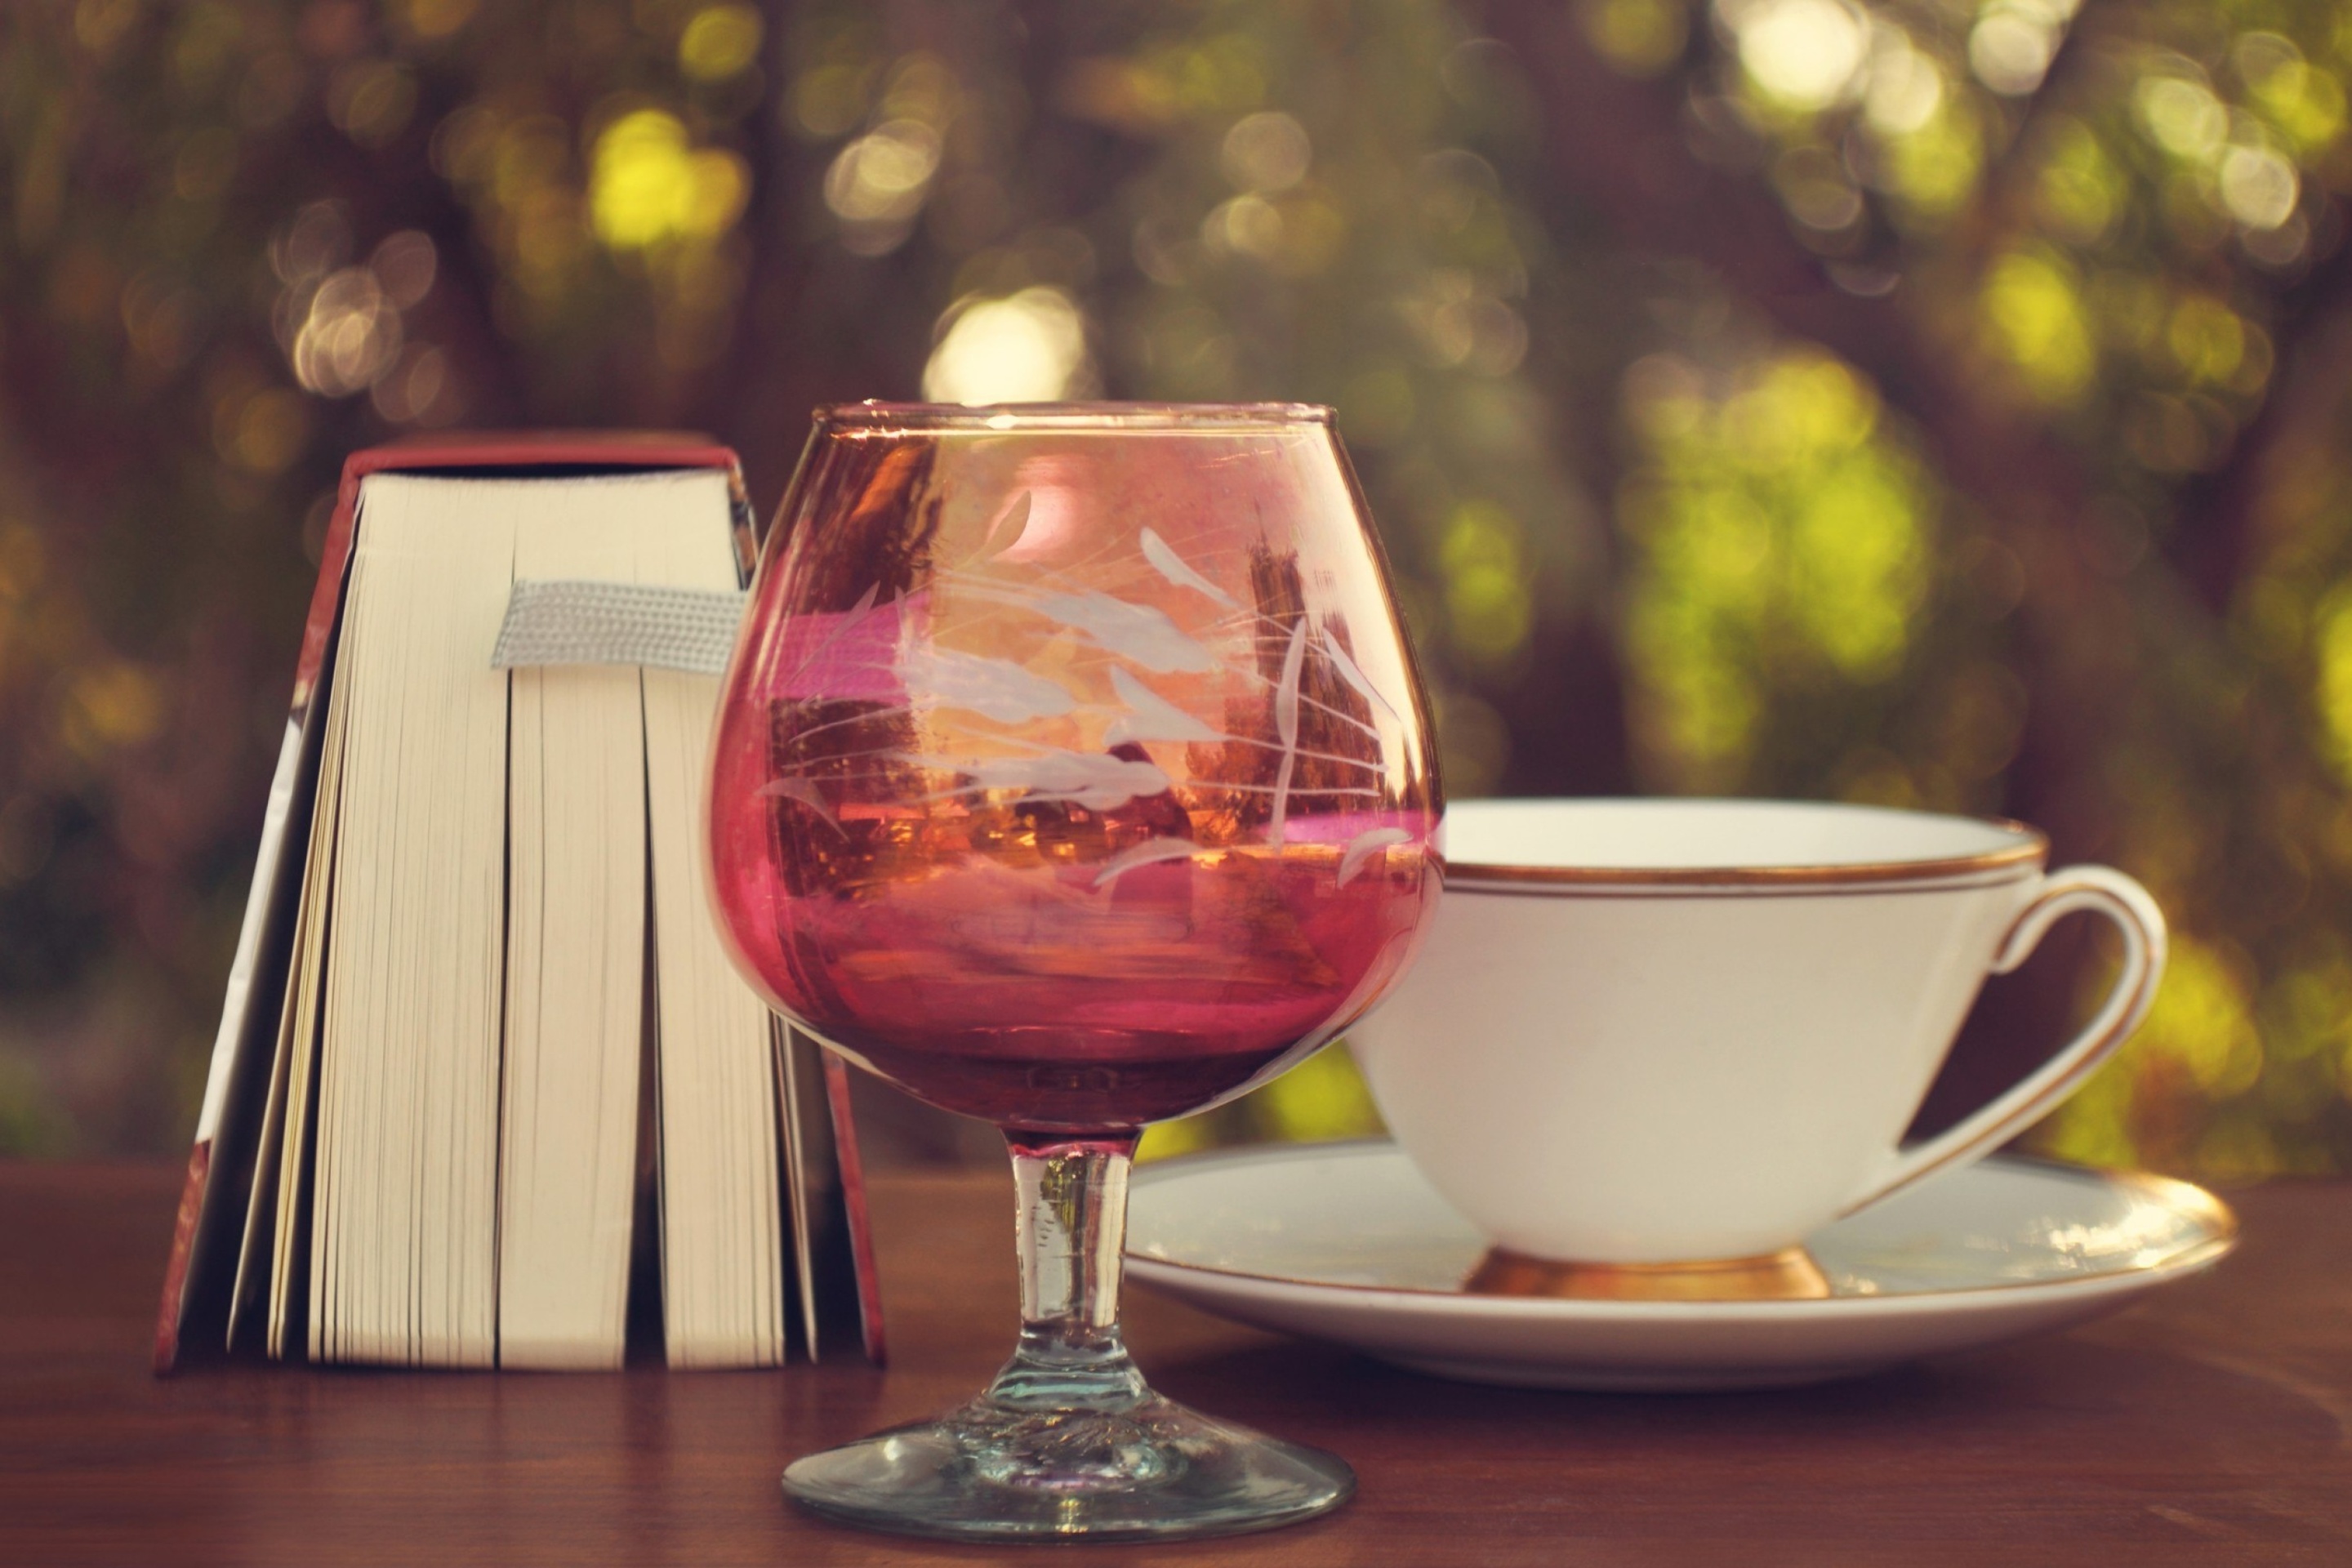 Perfect day with wine and book screenshot #1 2880x1920